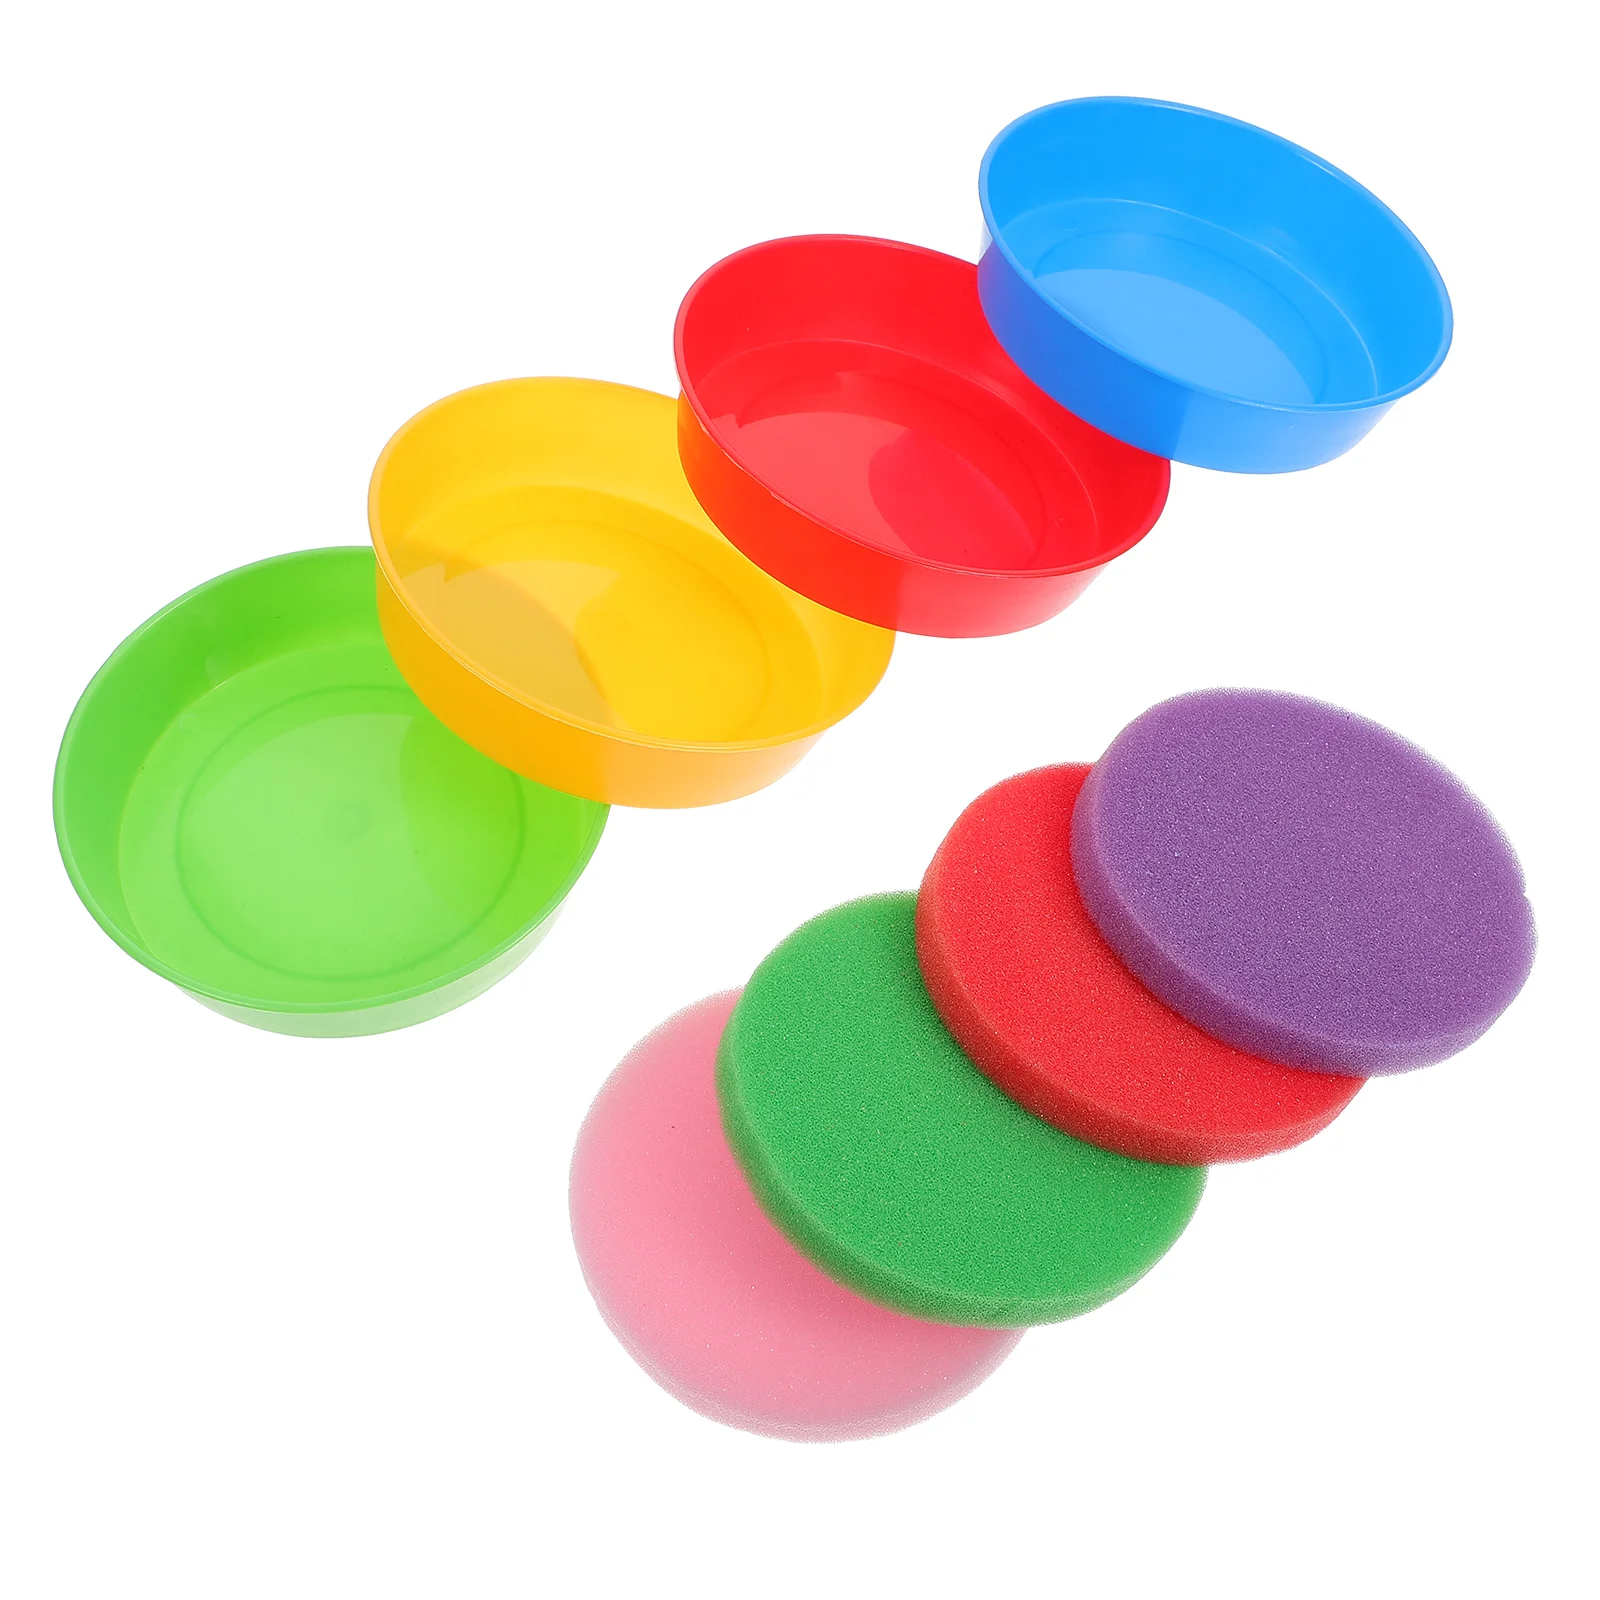 

4 Sets Palette Sponge Tray DIY Mixing Bowl Class Supplies Wooden Pigment Painting Brush Child Plastic Acrylic paintings